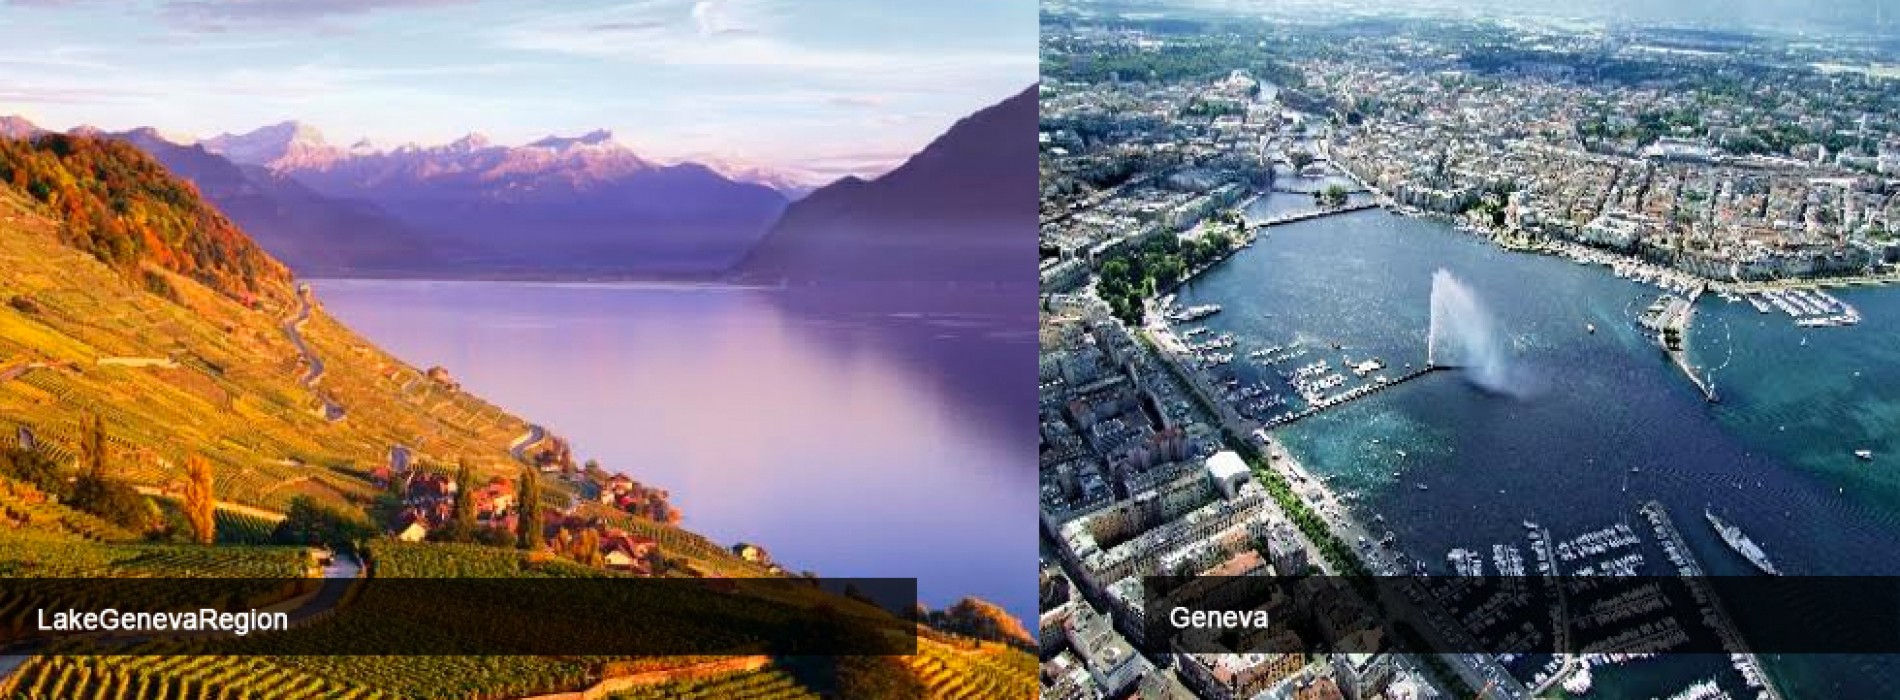 Switzerland Tourism launches the new campaigns for Winter and Summer 2017